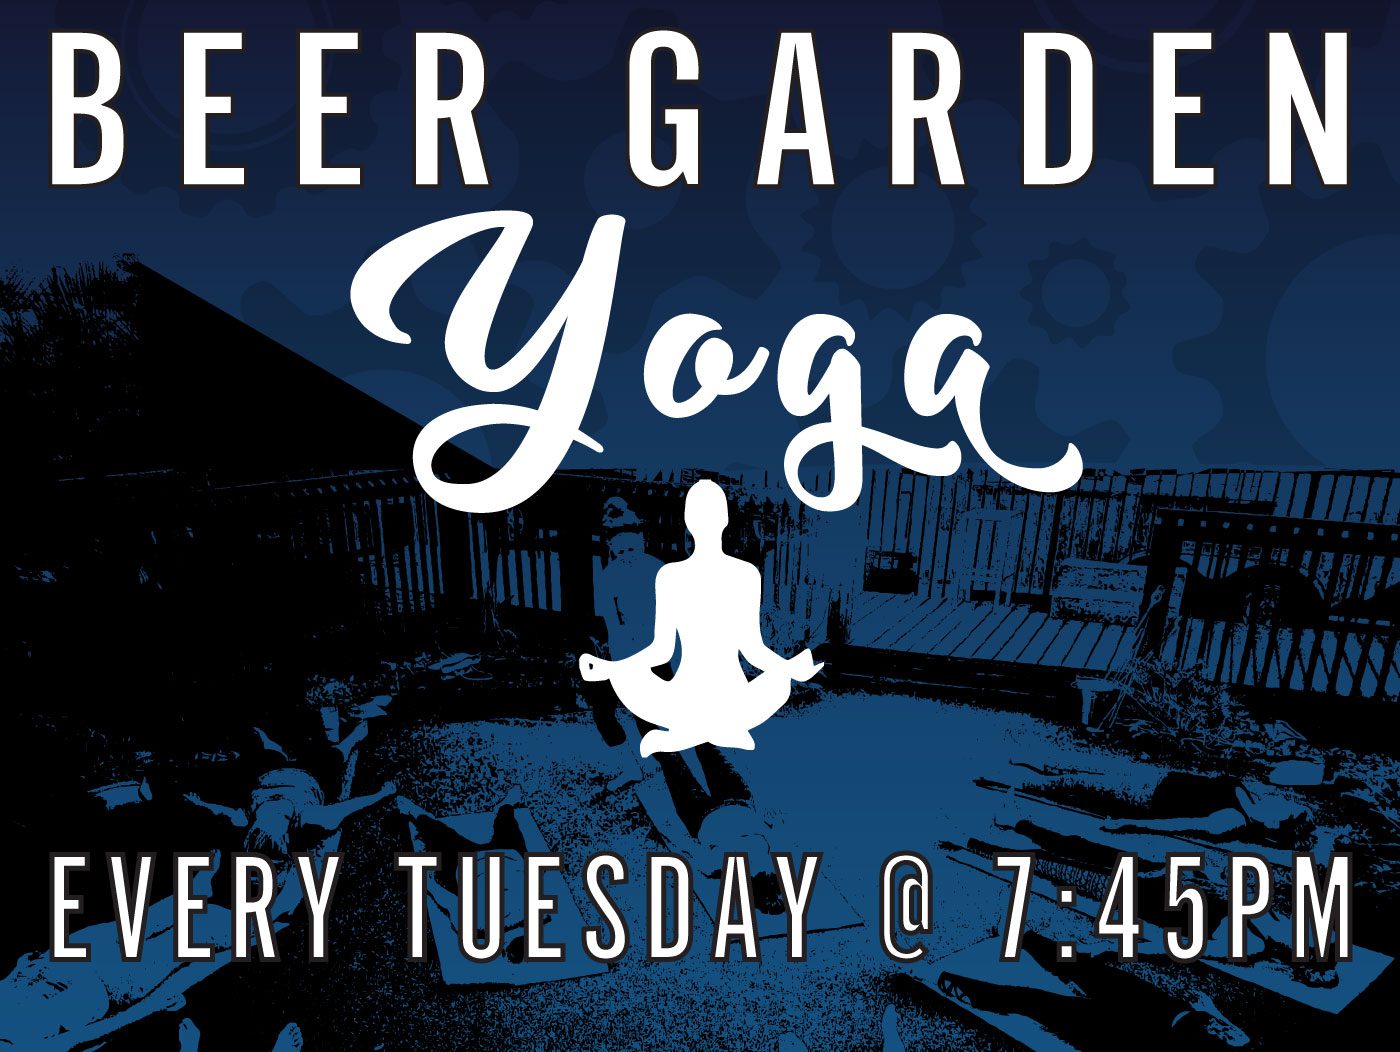 Motorworks Brewing presents Beer Garden Yoga every Tuesday @ 7:45 pm EST